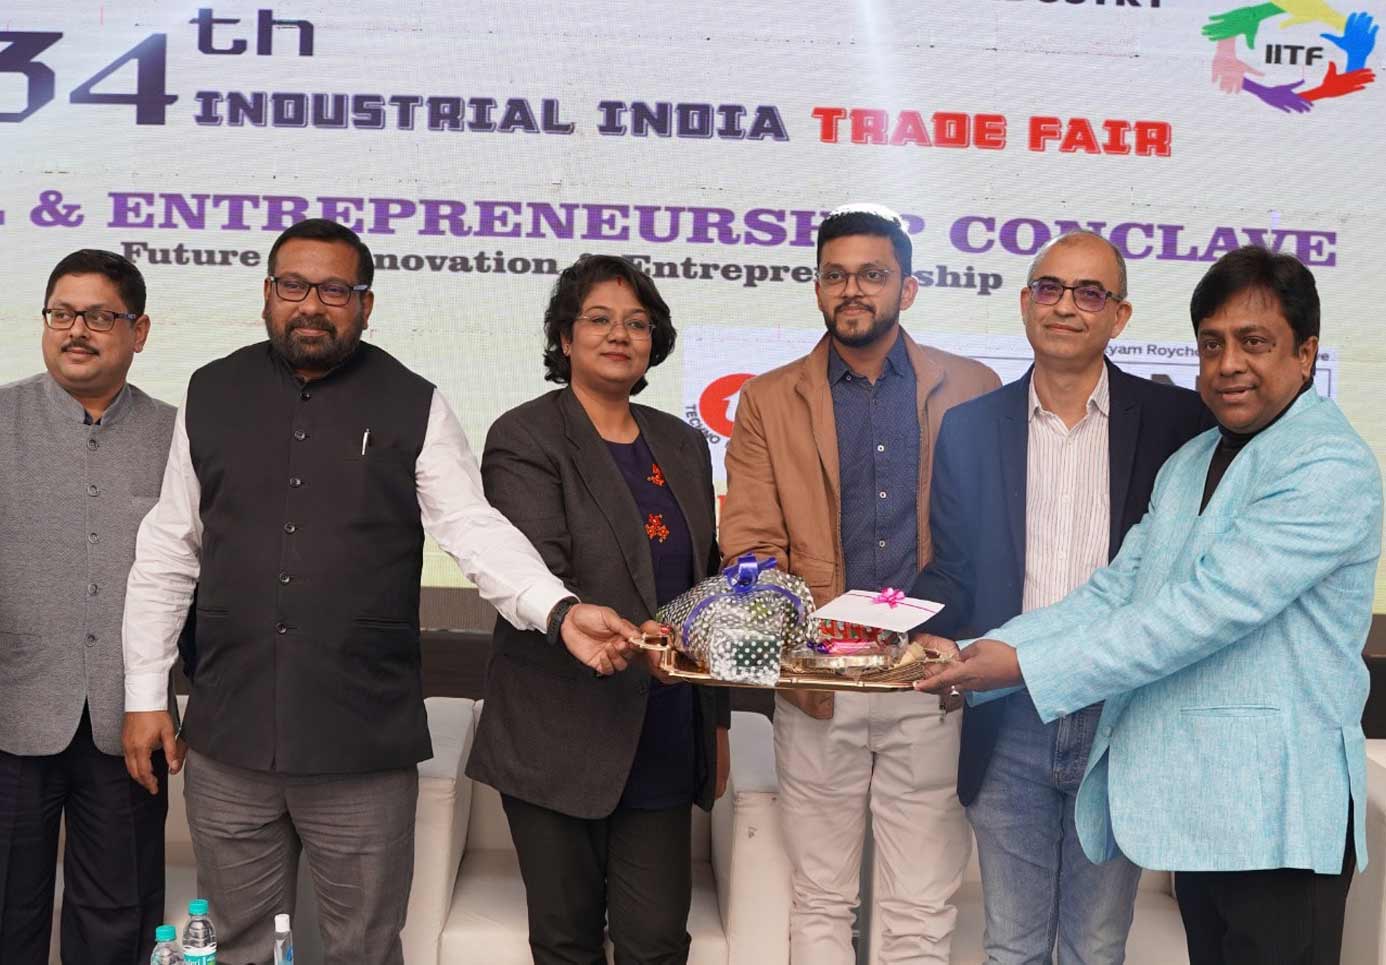 The Bengal National Chamber of Commerce & Industry in association with Sister Nivedita University had organized the Skill & Entrepreneurship Conclave at the 34th Industrial India Trade Fair 